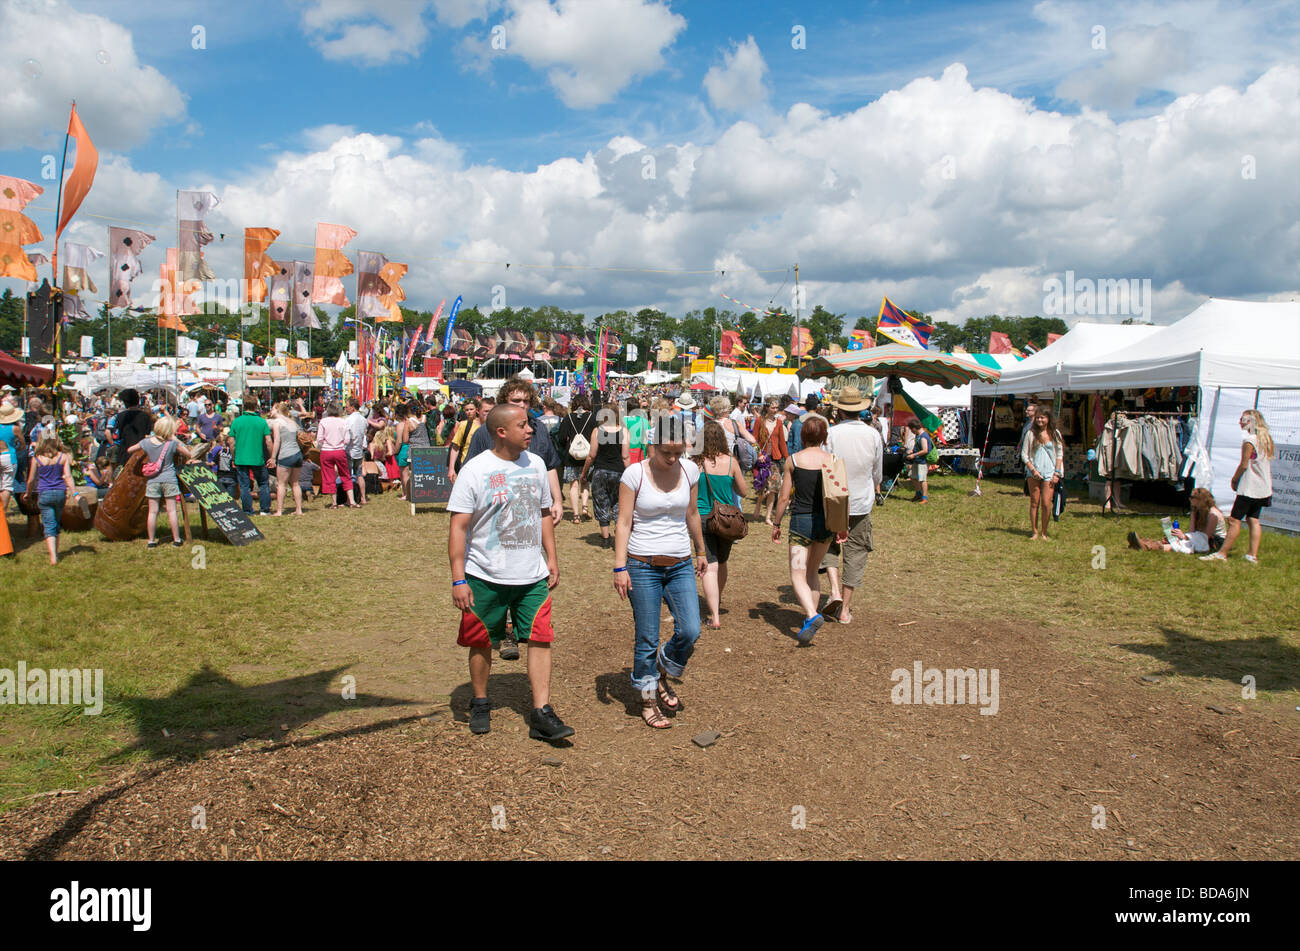 Crowds inside the arena at the WOMAD music festival Charlton Park Wiltshire UK Stock Photo